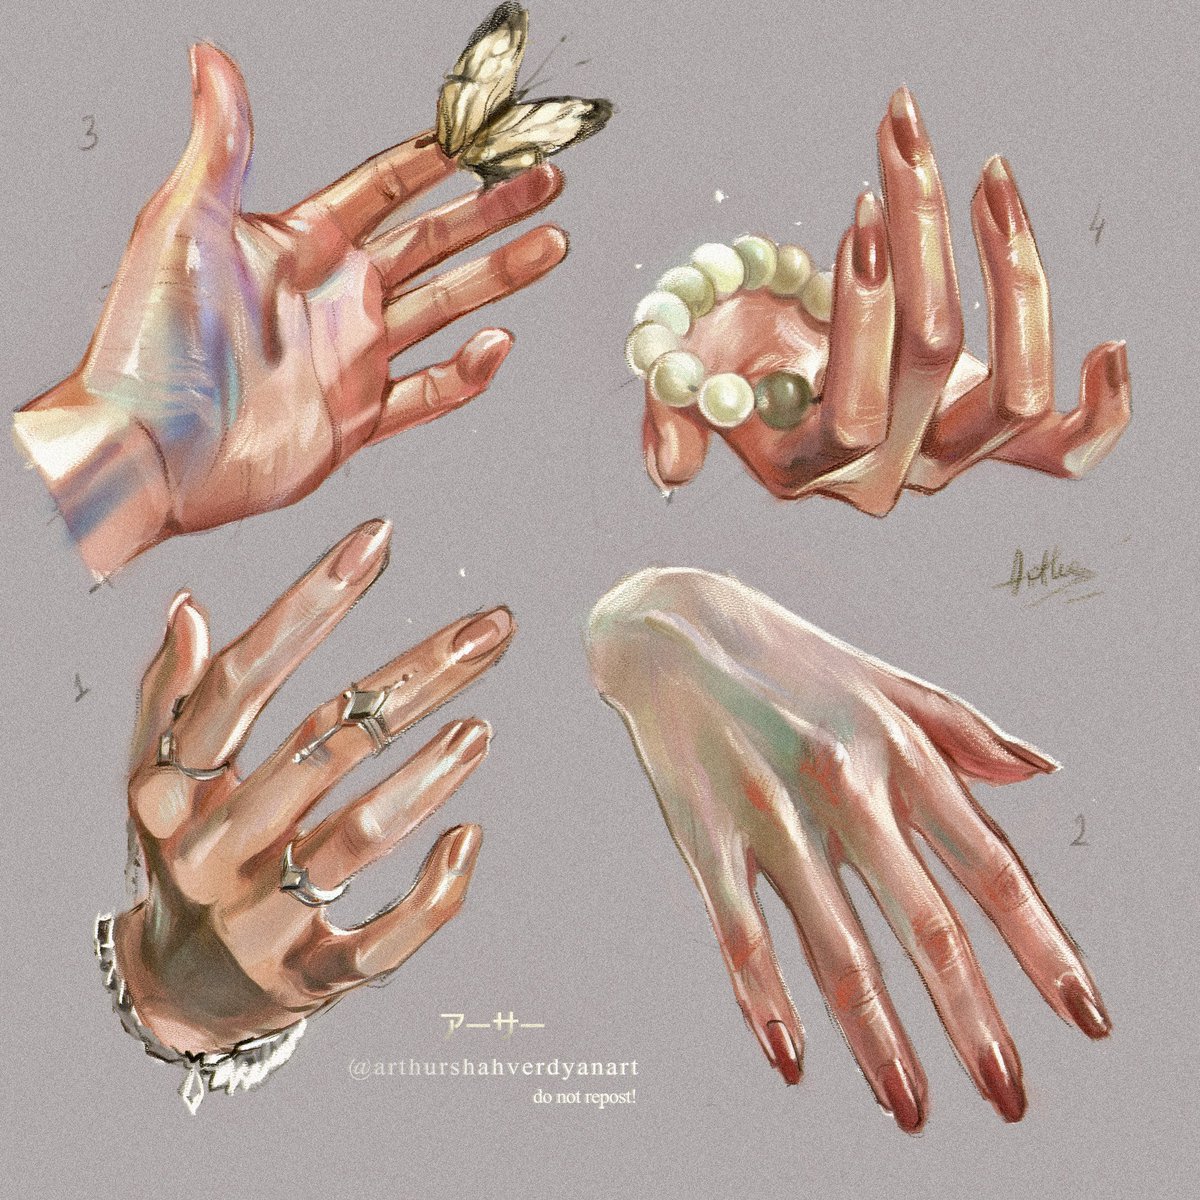 「Some hand studies to scare Ai artists  」|Arthur (Commission CLOSED.)のイラスト